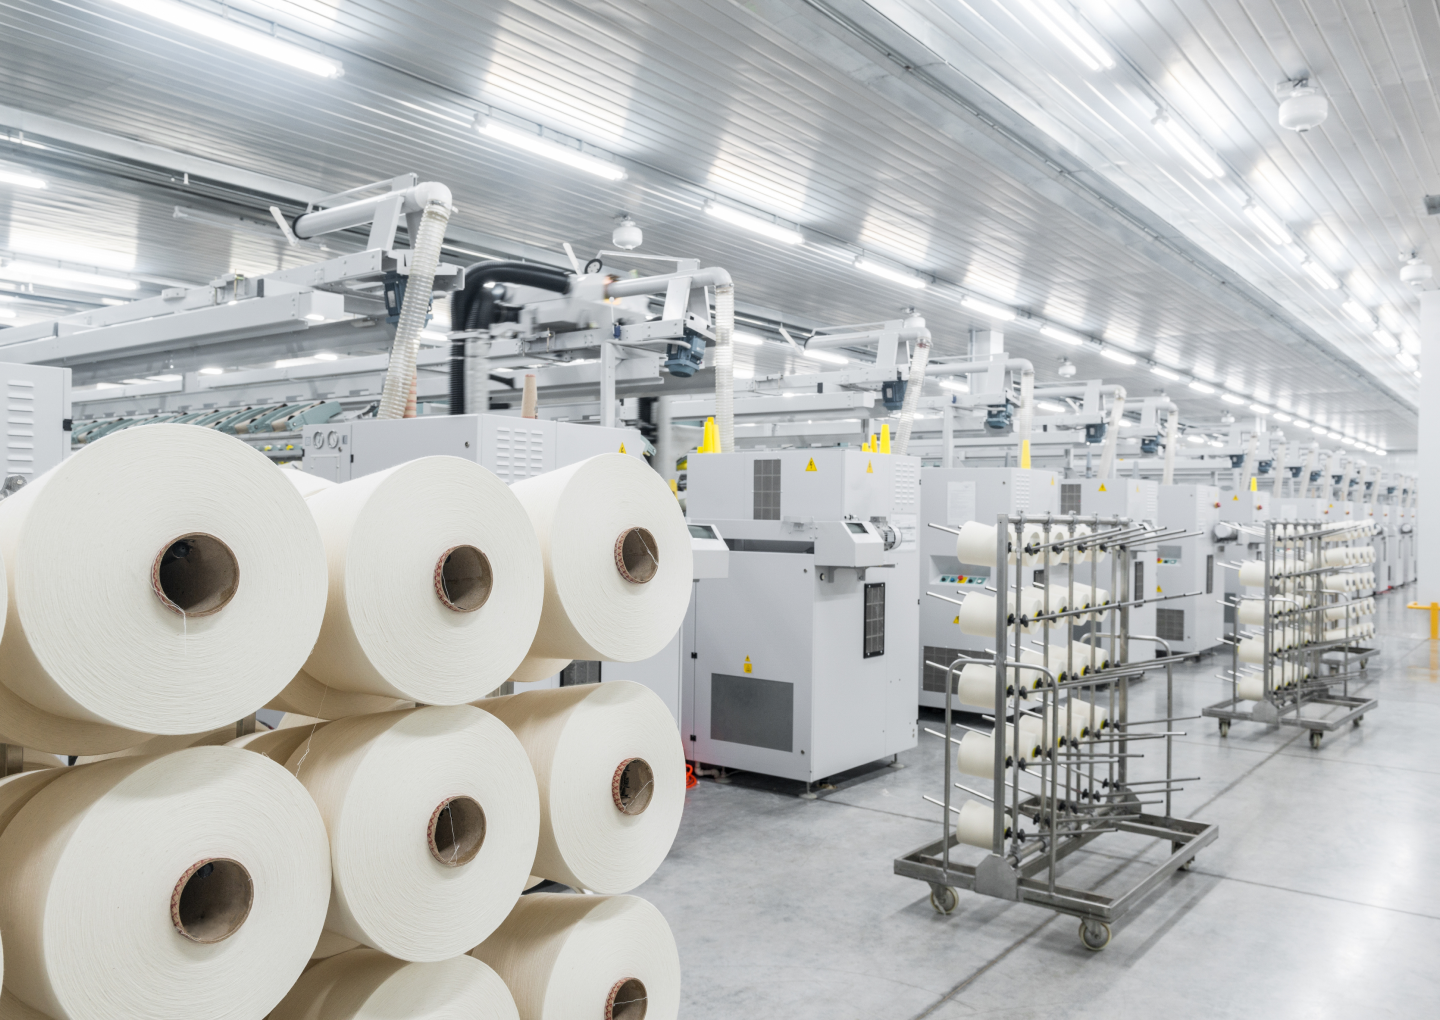 textile solution industry background picture of industry background